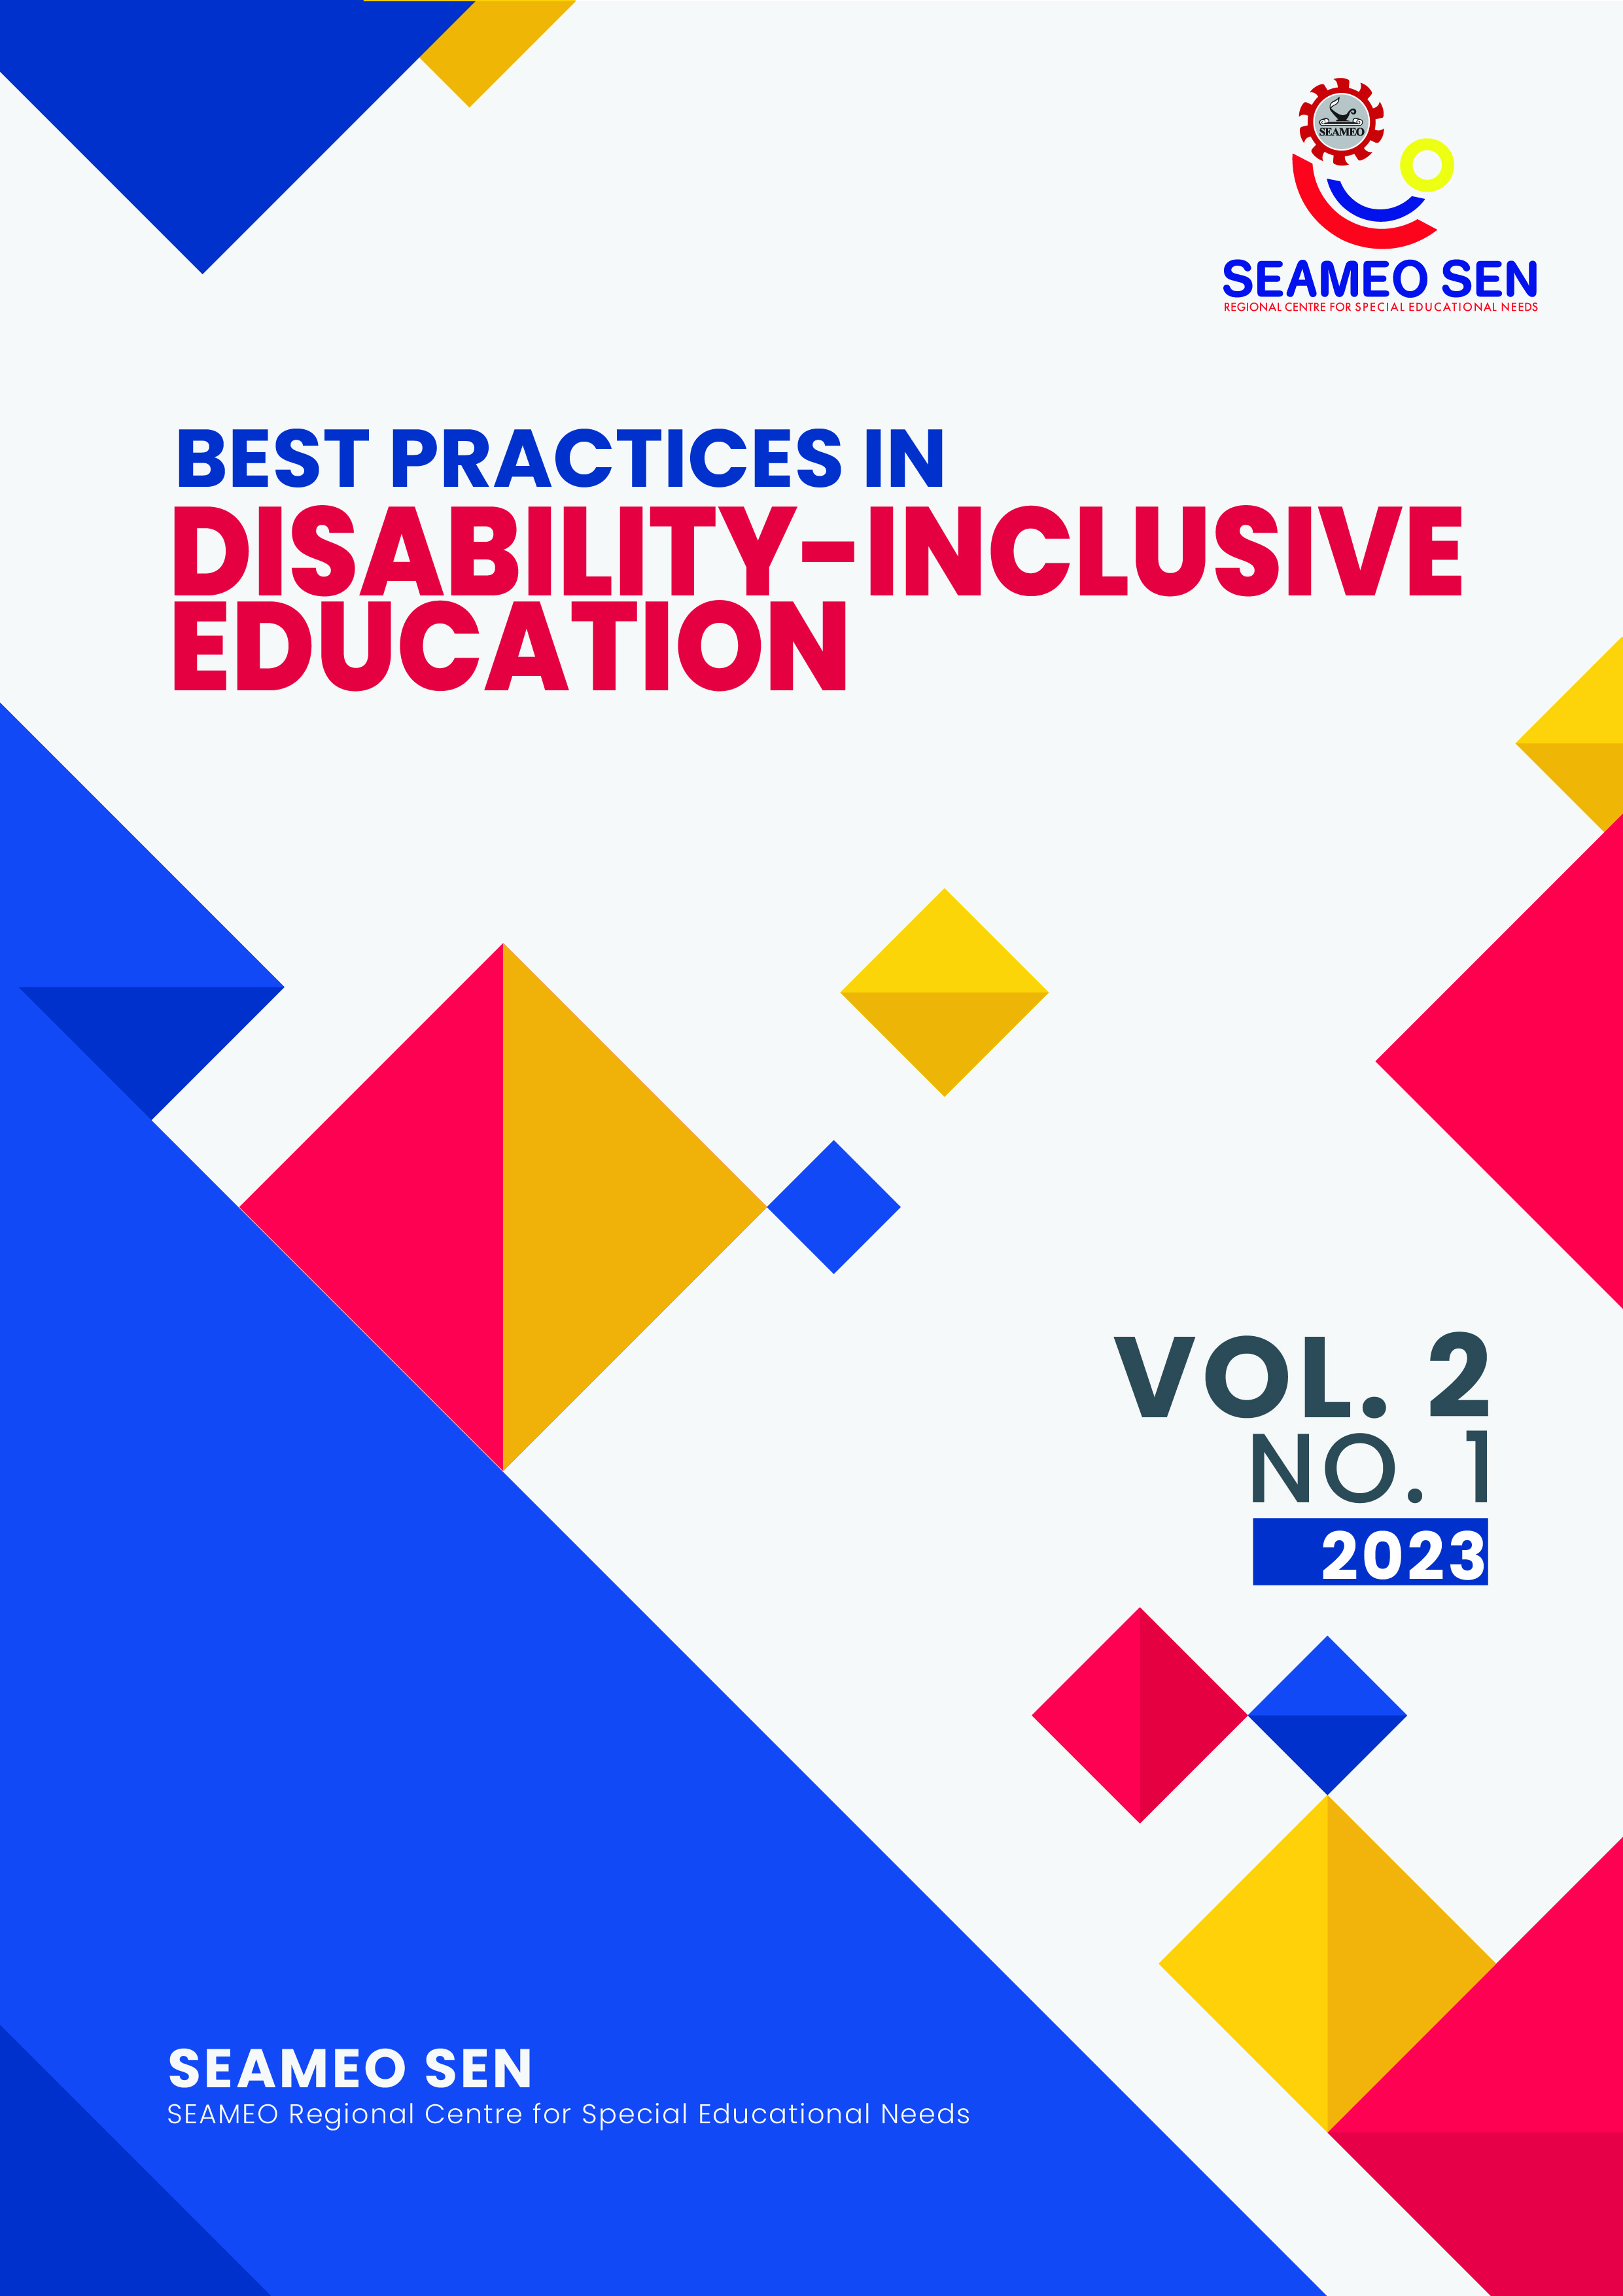 					View Vol. 2 No. 1 (2023): Best Practices in Disability-Inclusive Education
				